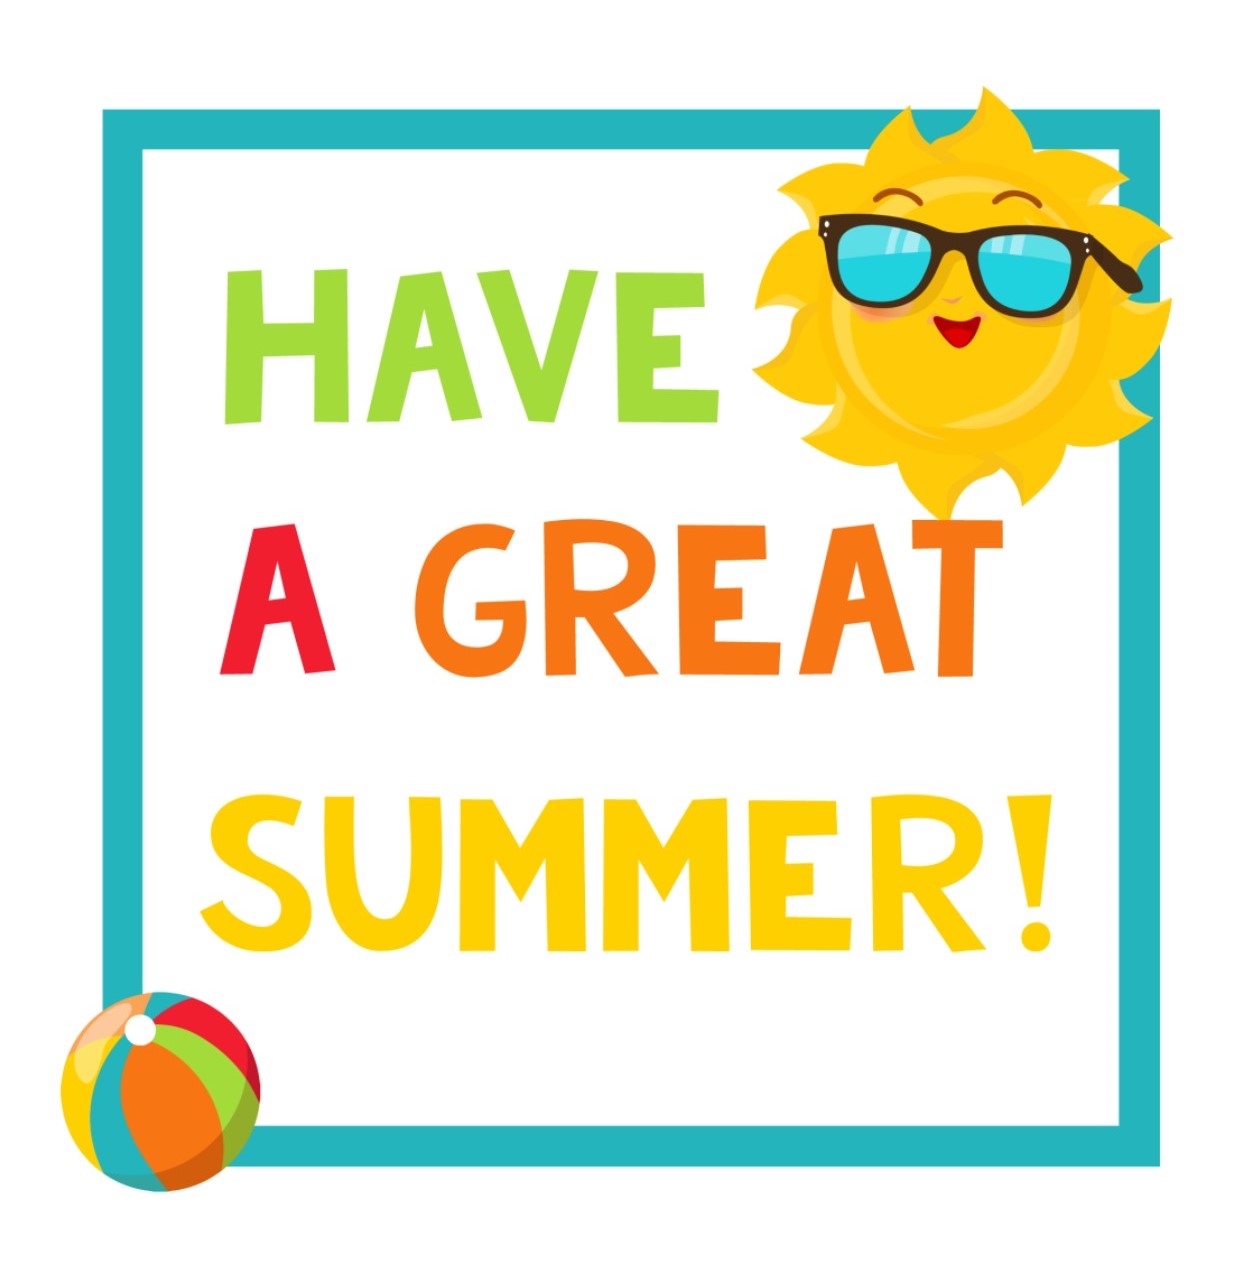 Have a Great Summer.